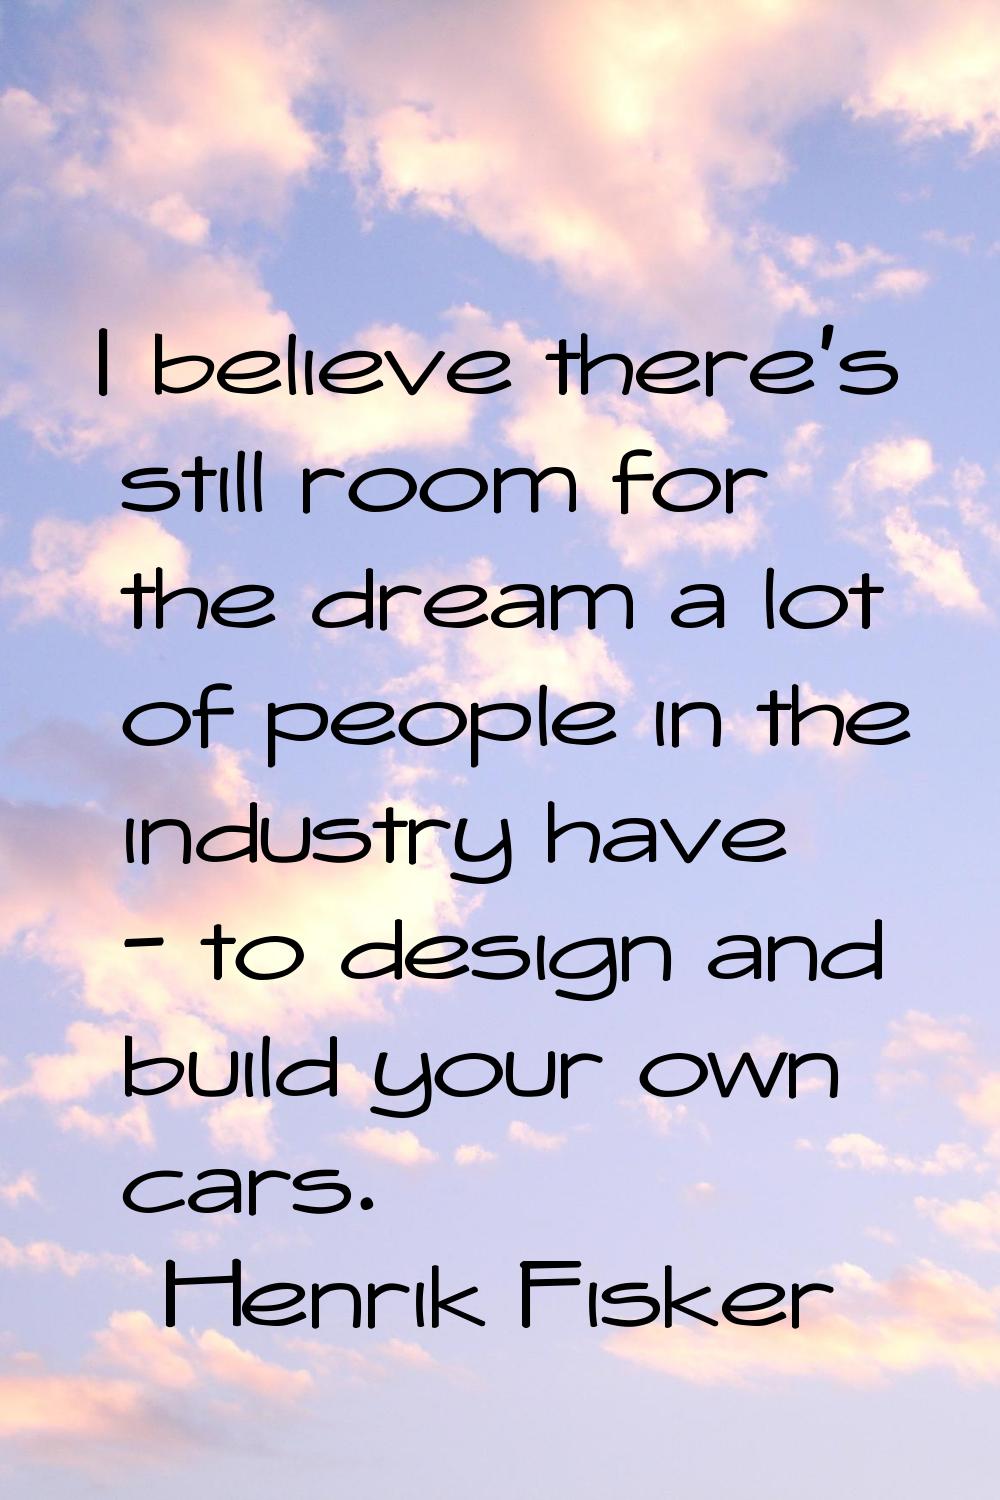 I believe there's still room for the dream a lot of people in the industry have - to design and bui